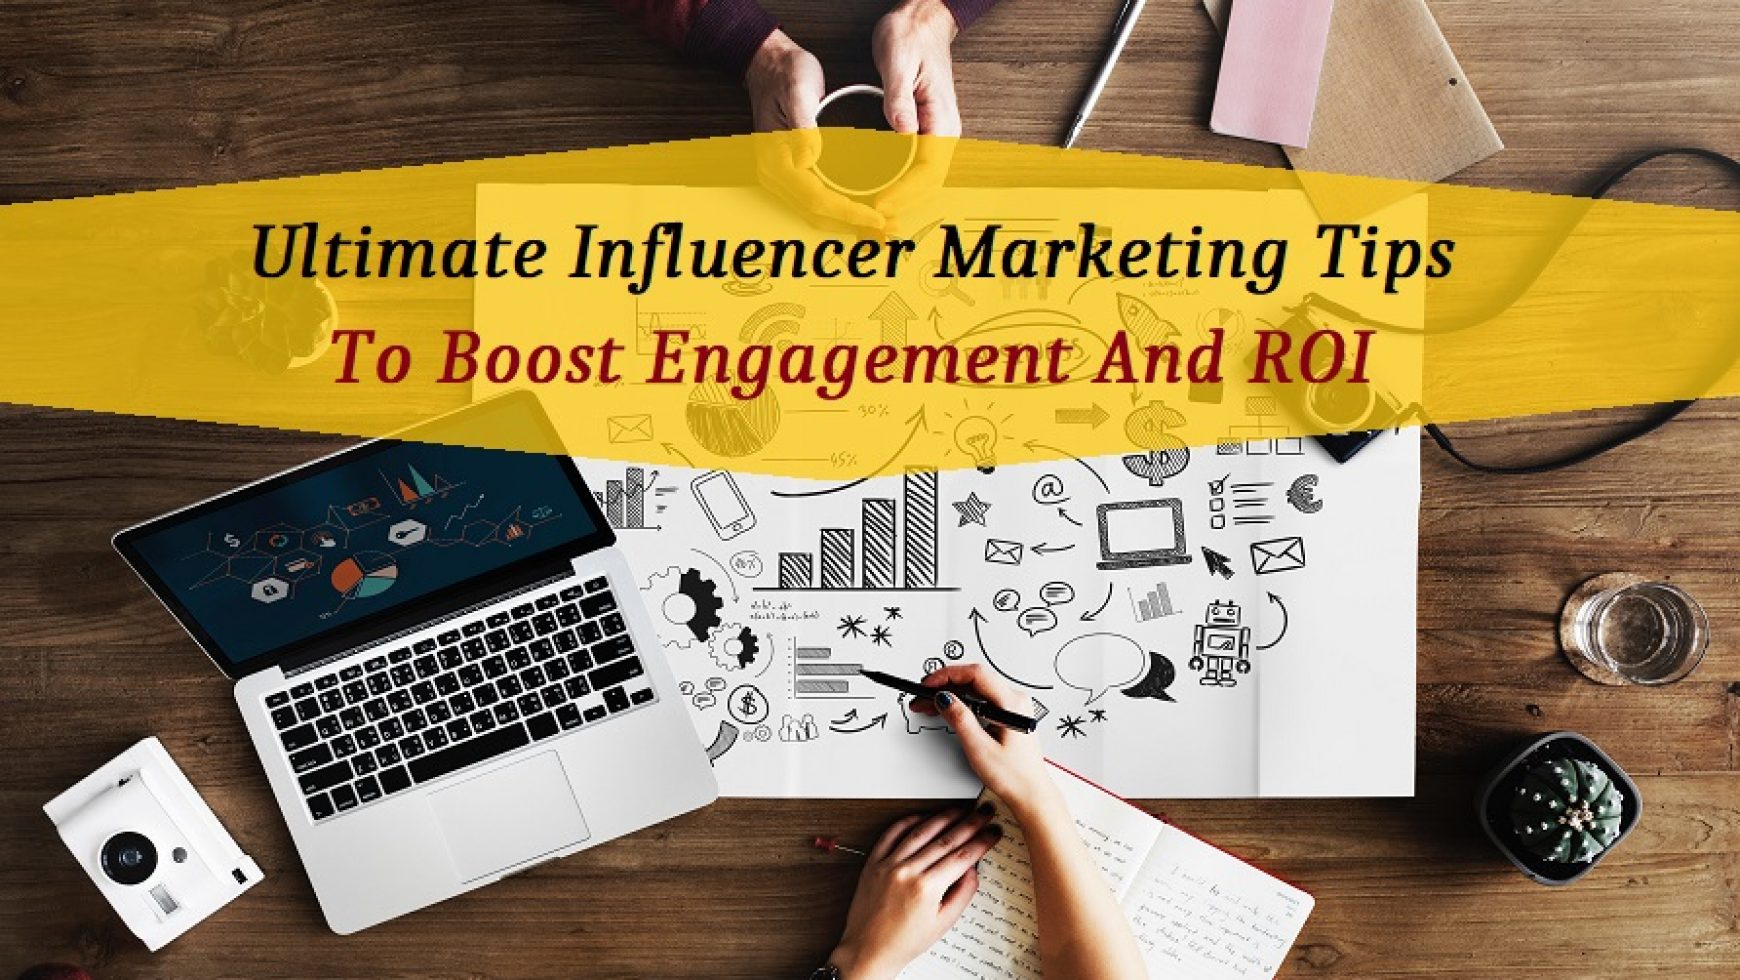 Ultimate Influencer Marketing Tips To Boost Engagement And ROI